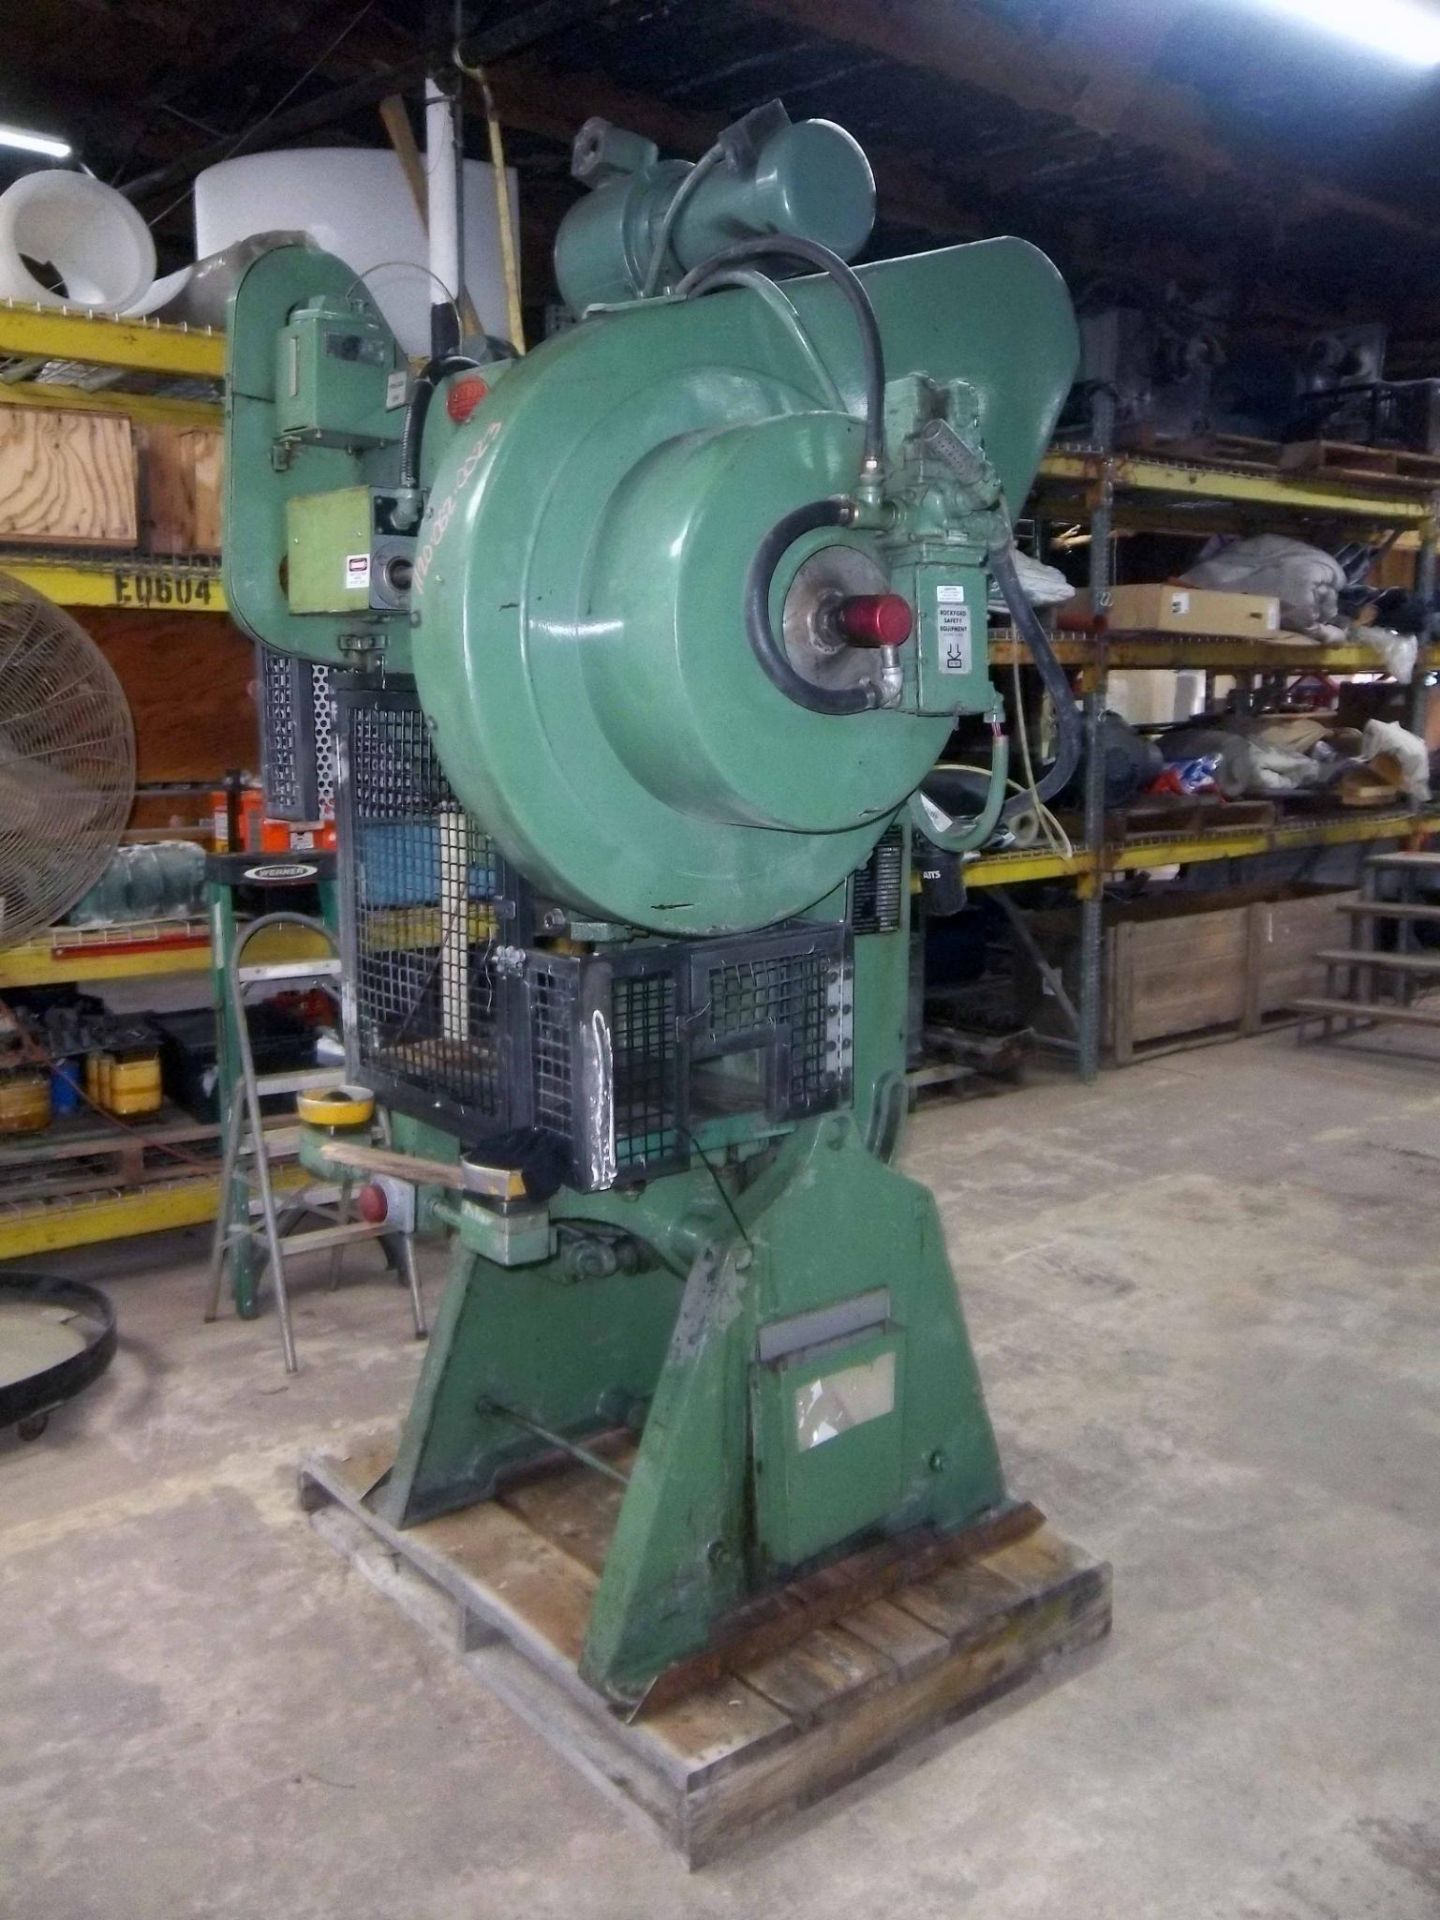 OBI PRESS, SOUTH BEND JOHNSON 27 T. CAP. MDL. 27-EW-A.C., 230 v., 3-phase, motor can swap to 460 v., - Image 4 of 10